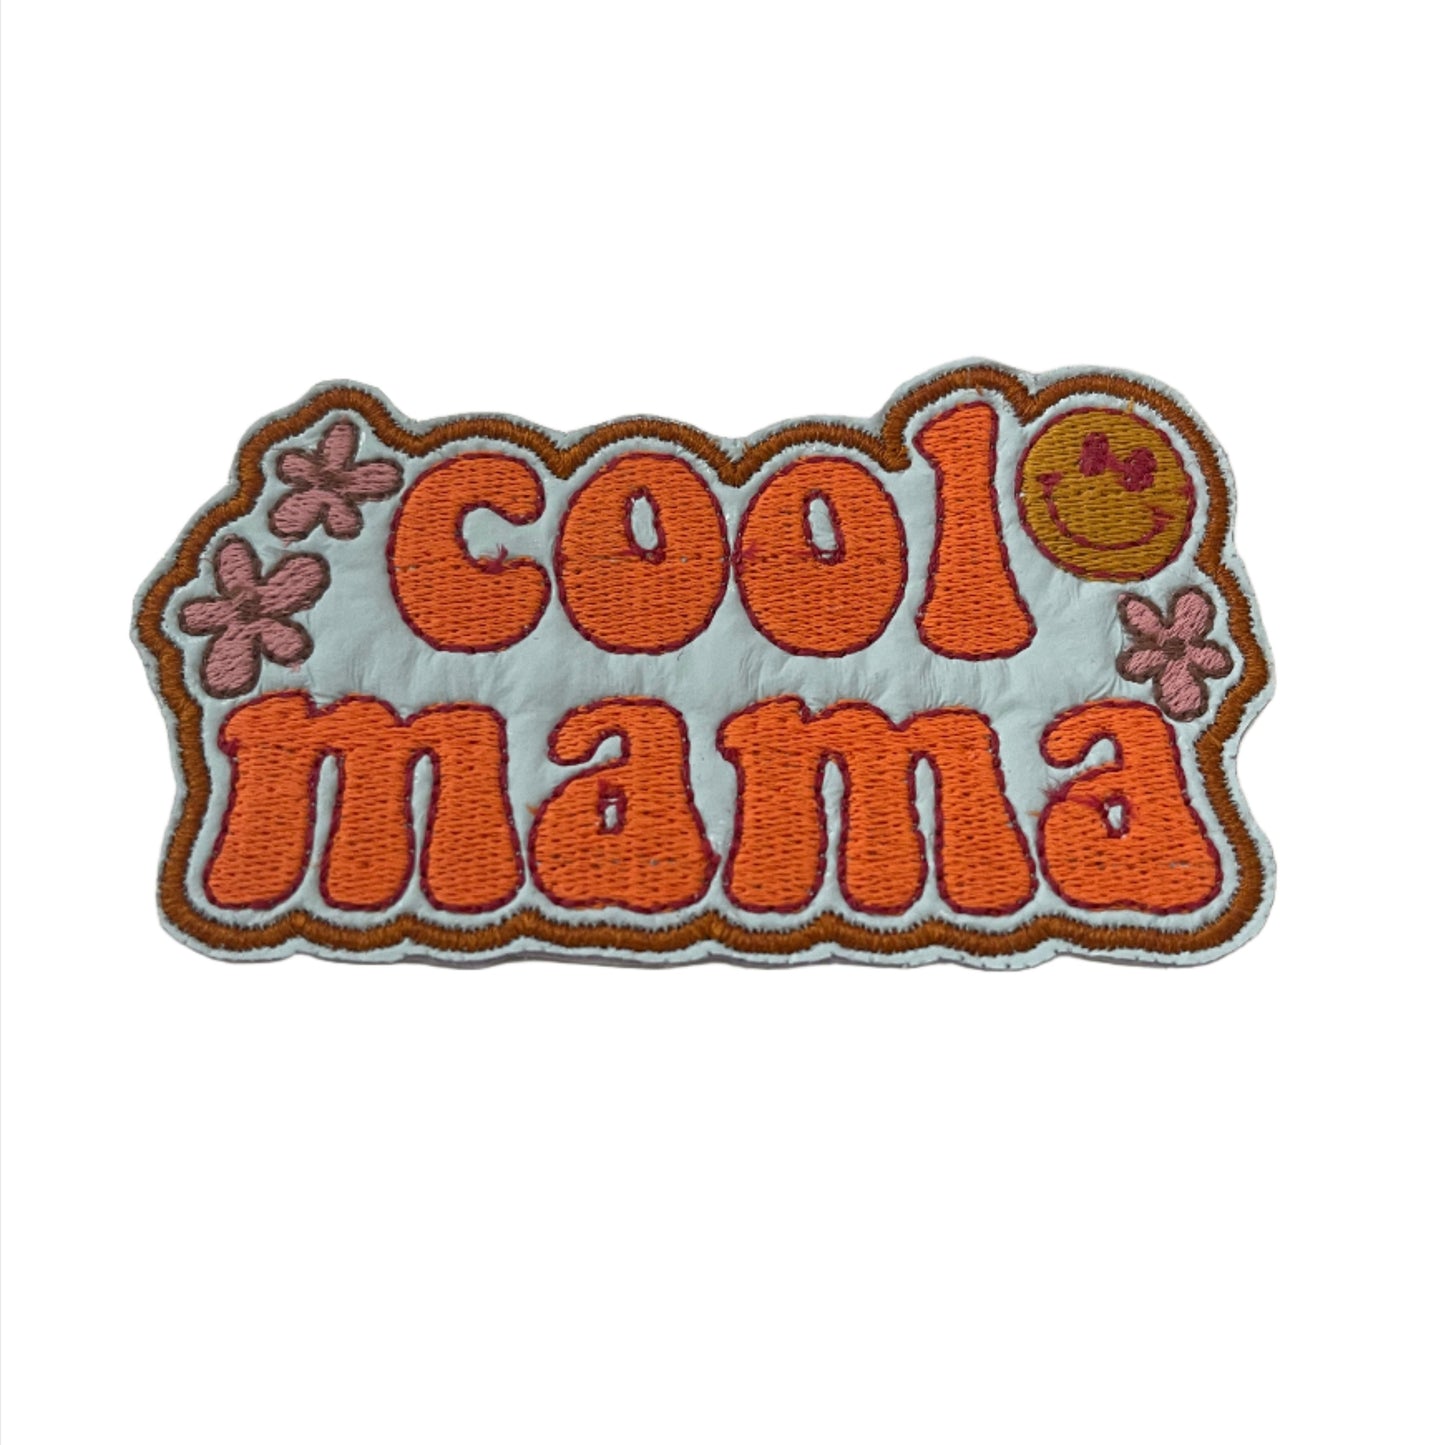 Cool Mama Iron-On Patch - Funky and Fun Retro Style